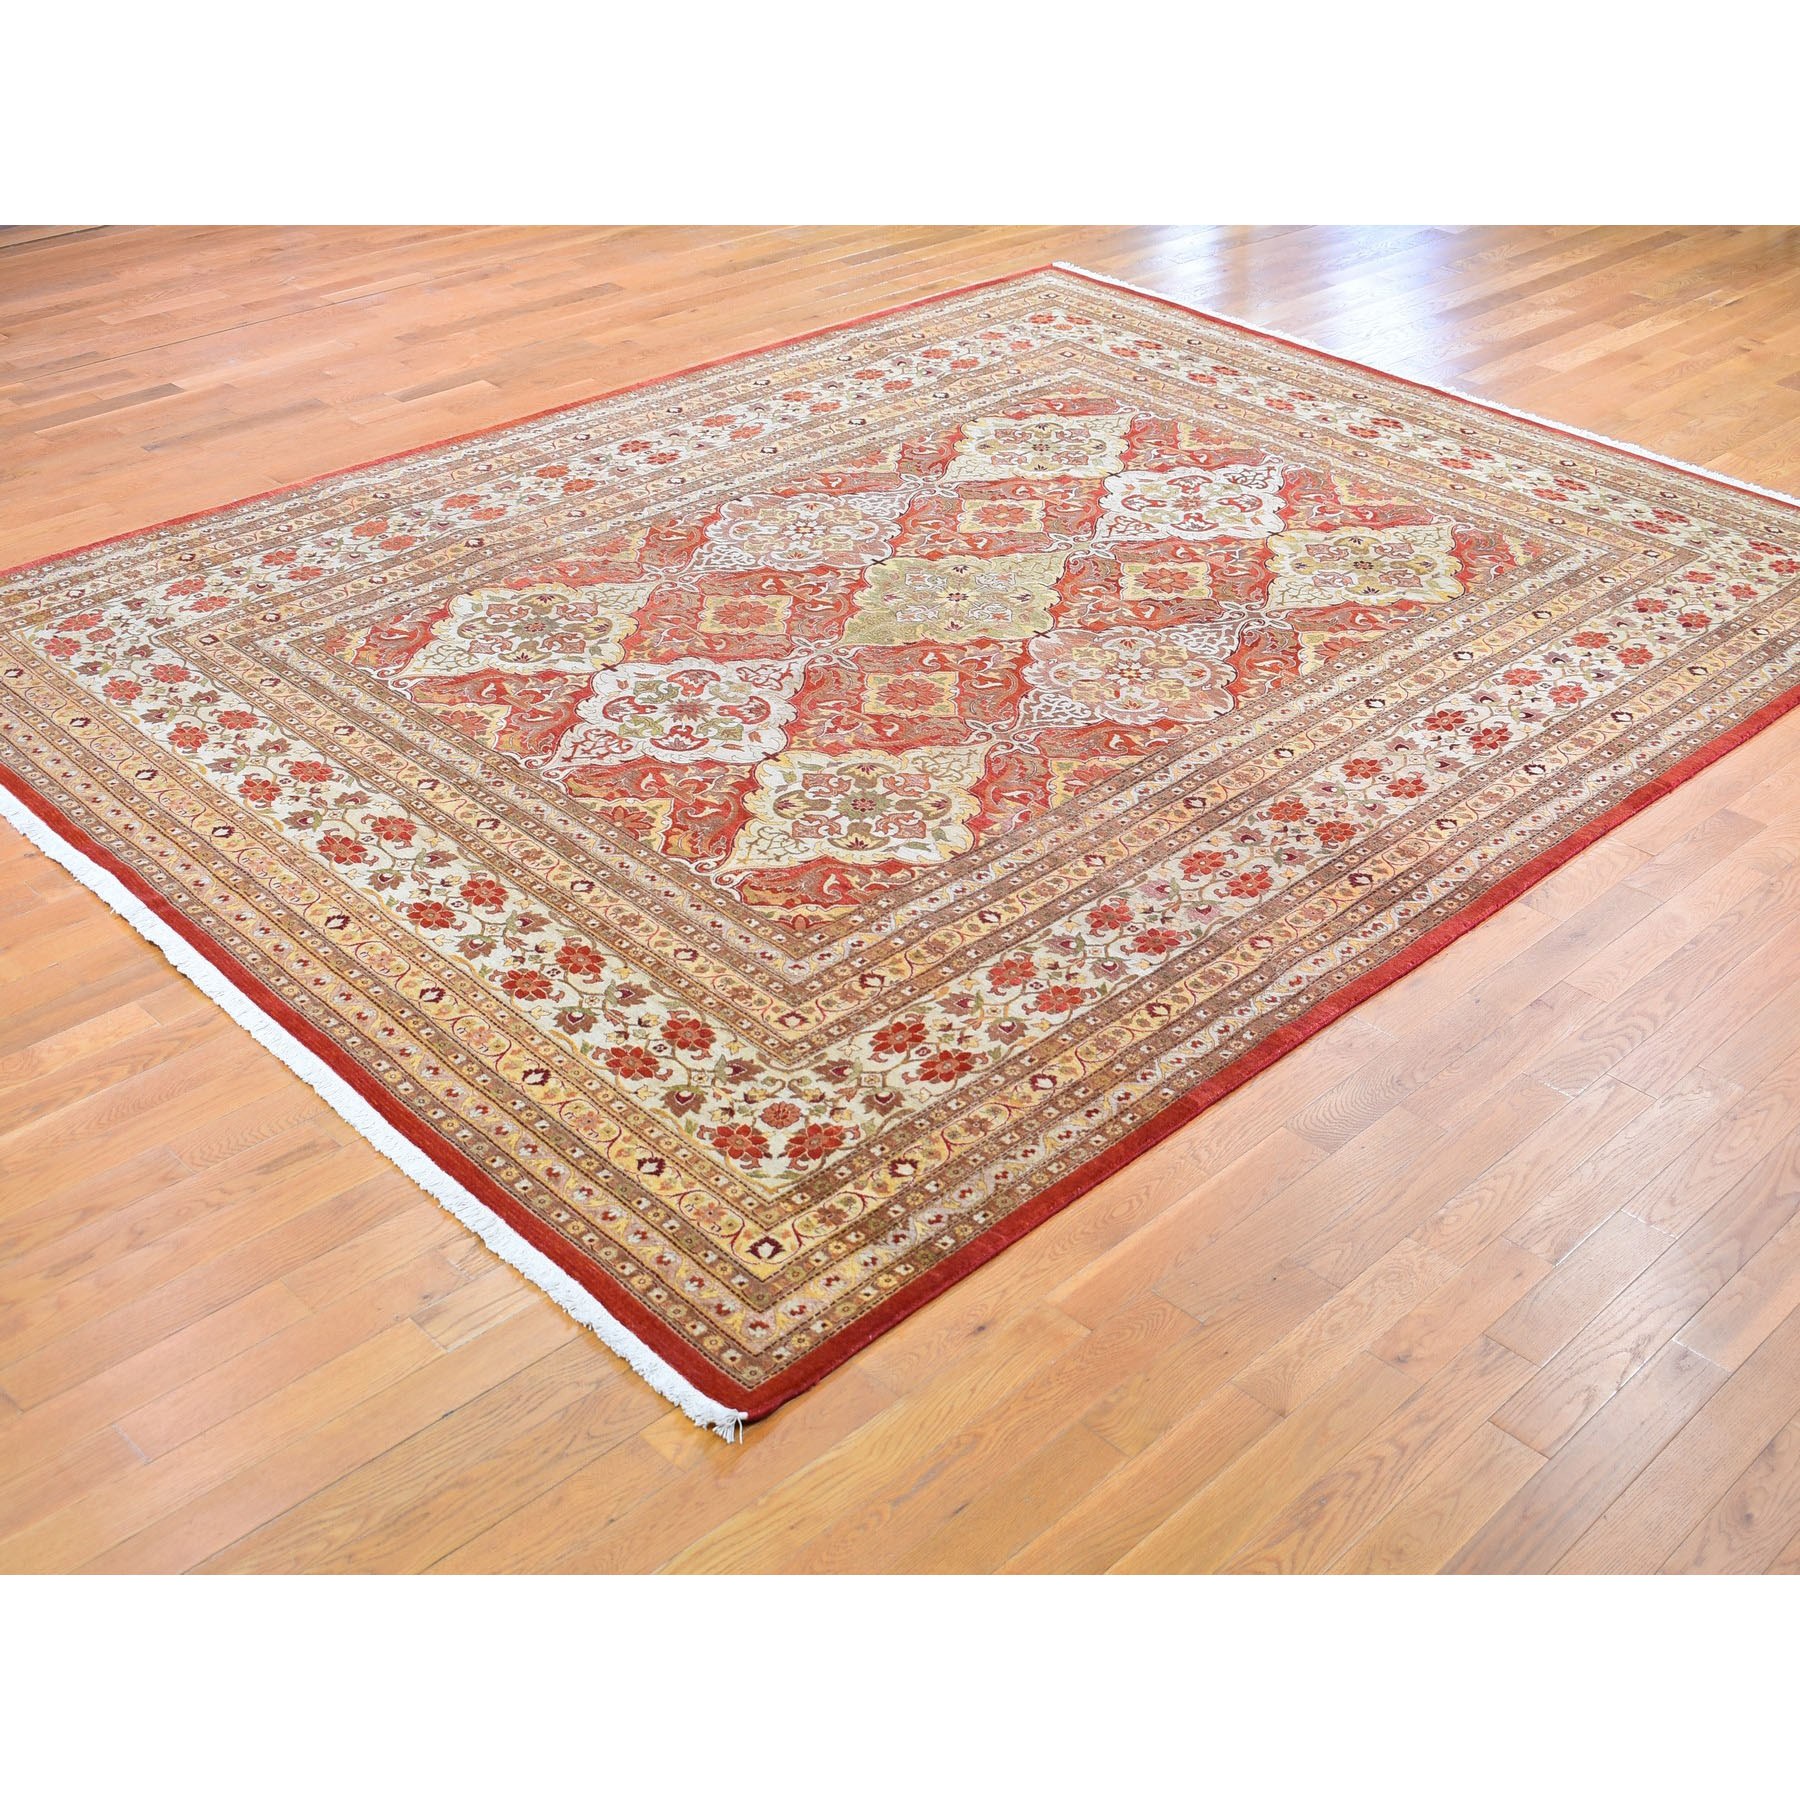 9-2 x11-10  Red New Pak Persian 300 KPSI Vegetable Dyes Hand Knotted Pure Wool Oriental Rug 